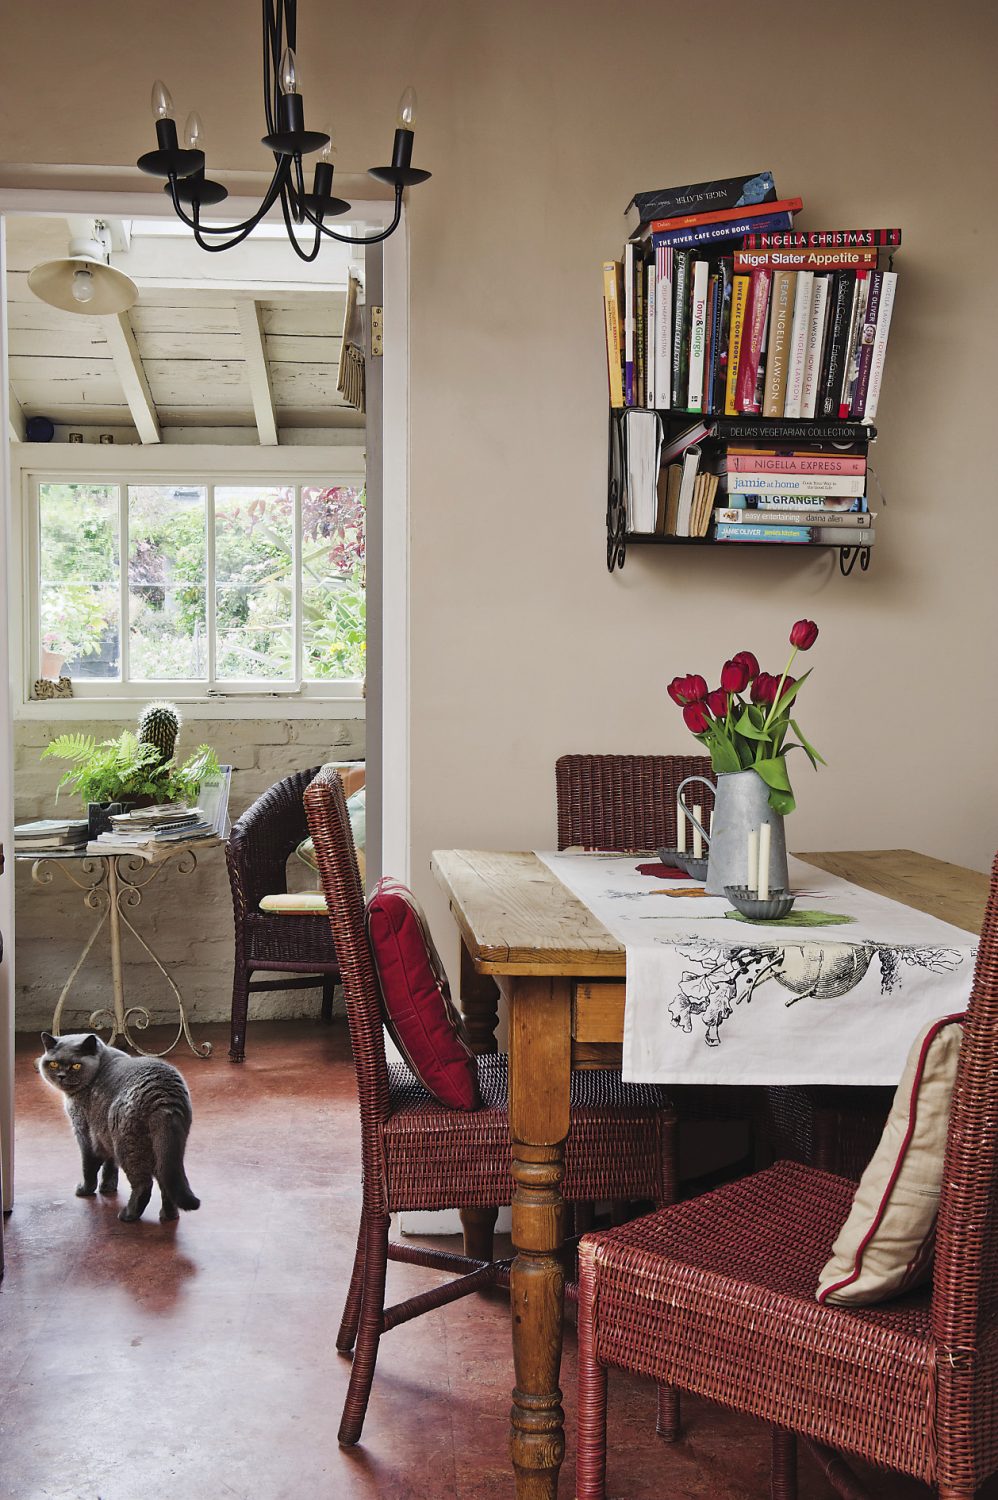 Wicker chairs surround the wooden table in the kitchen area. Above it, metal shelves house Ann’s collection of cookery books